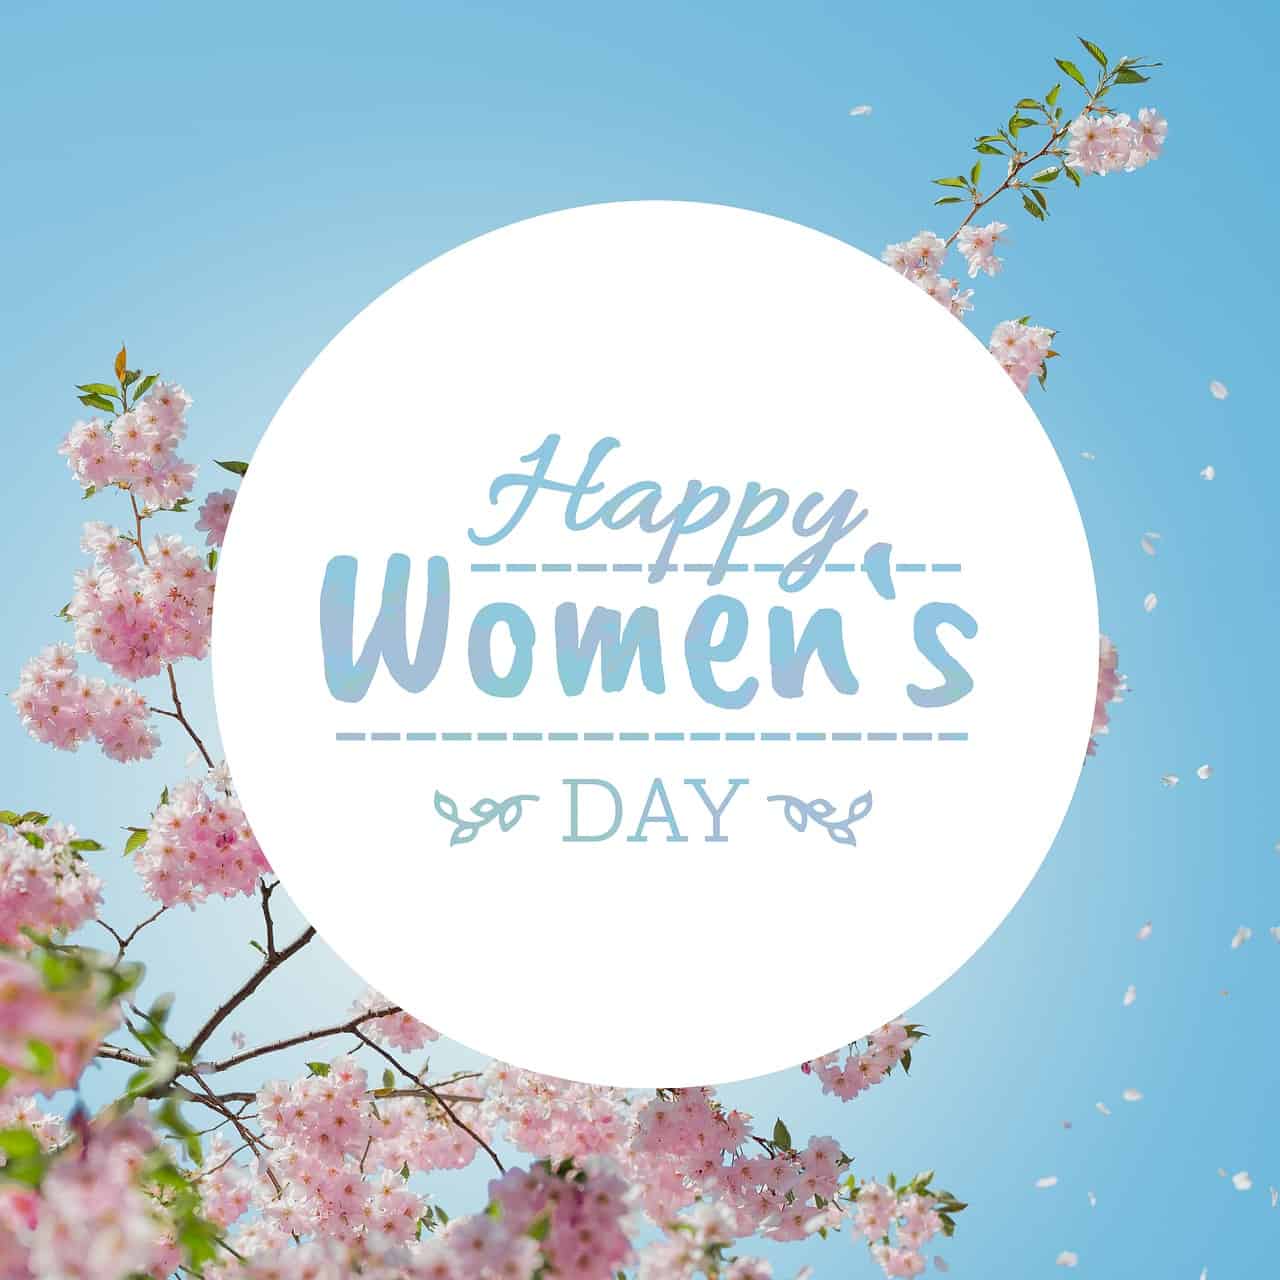 Women Day Images